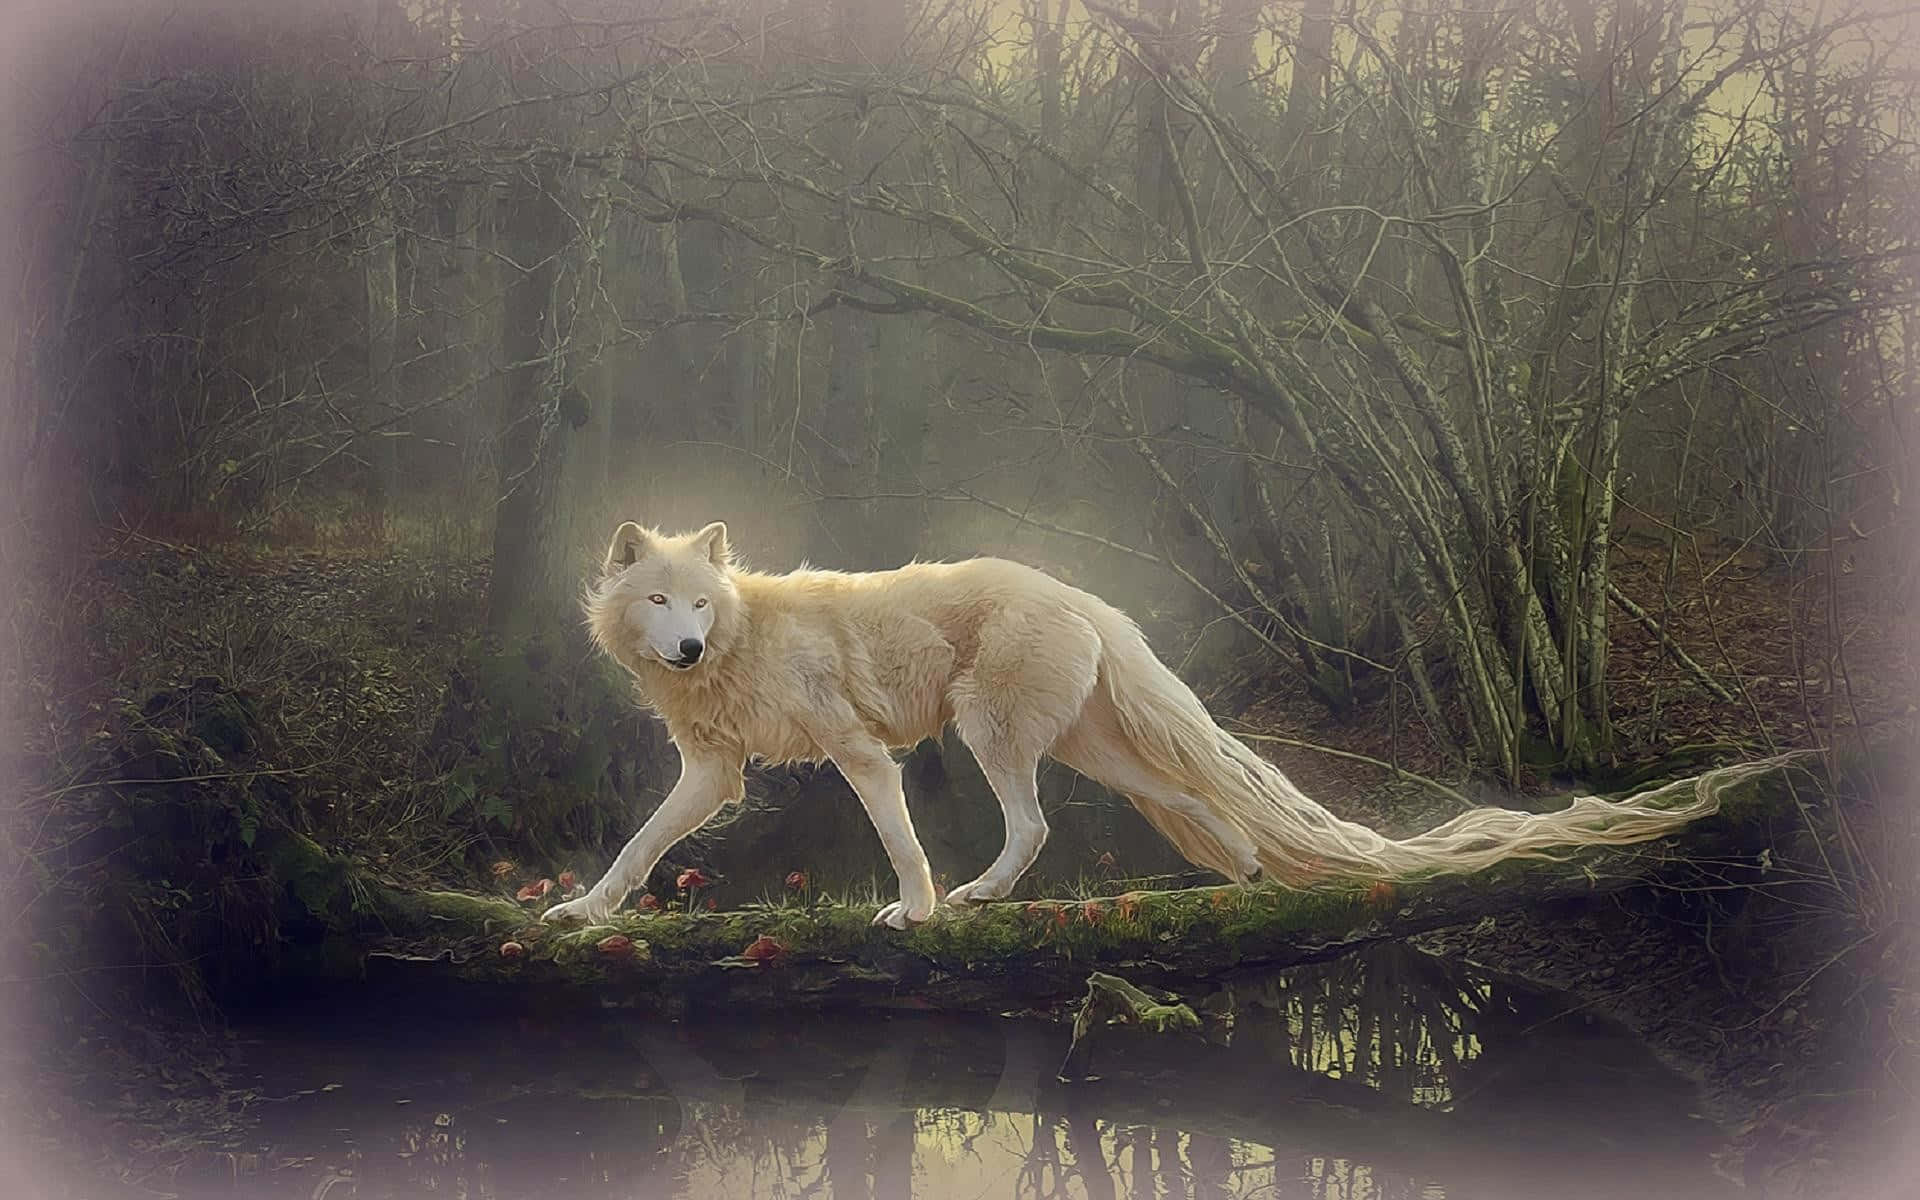 Mystical beauty of the majestic wolf